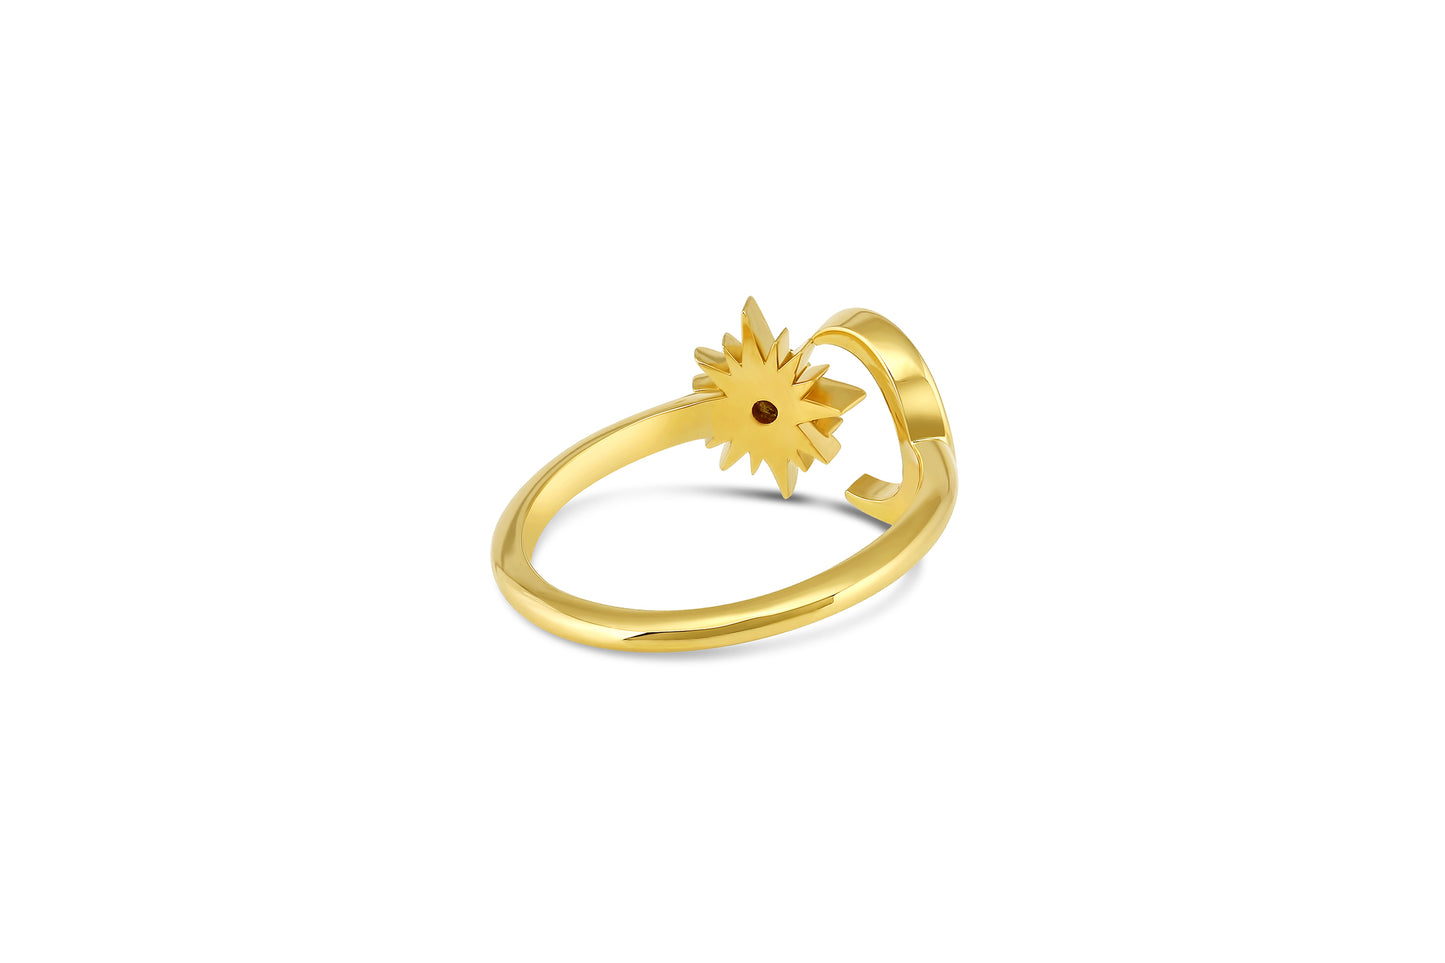 back view of the 18k yellow gold crescent moon and star with diamond center stone open ring on white background.